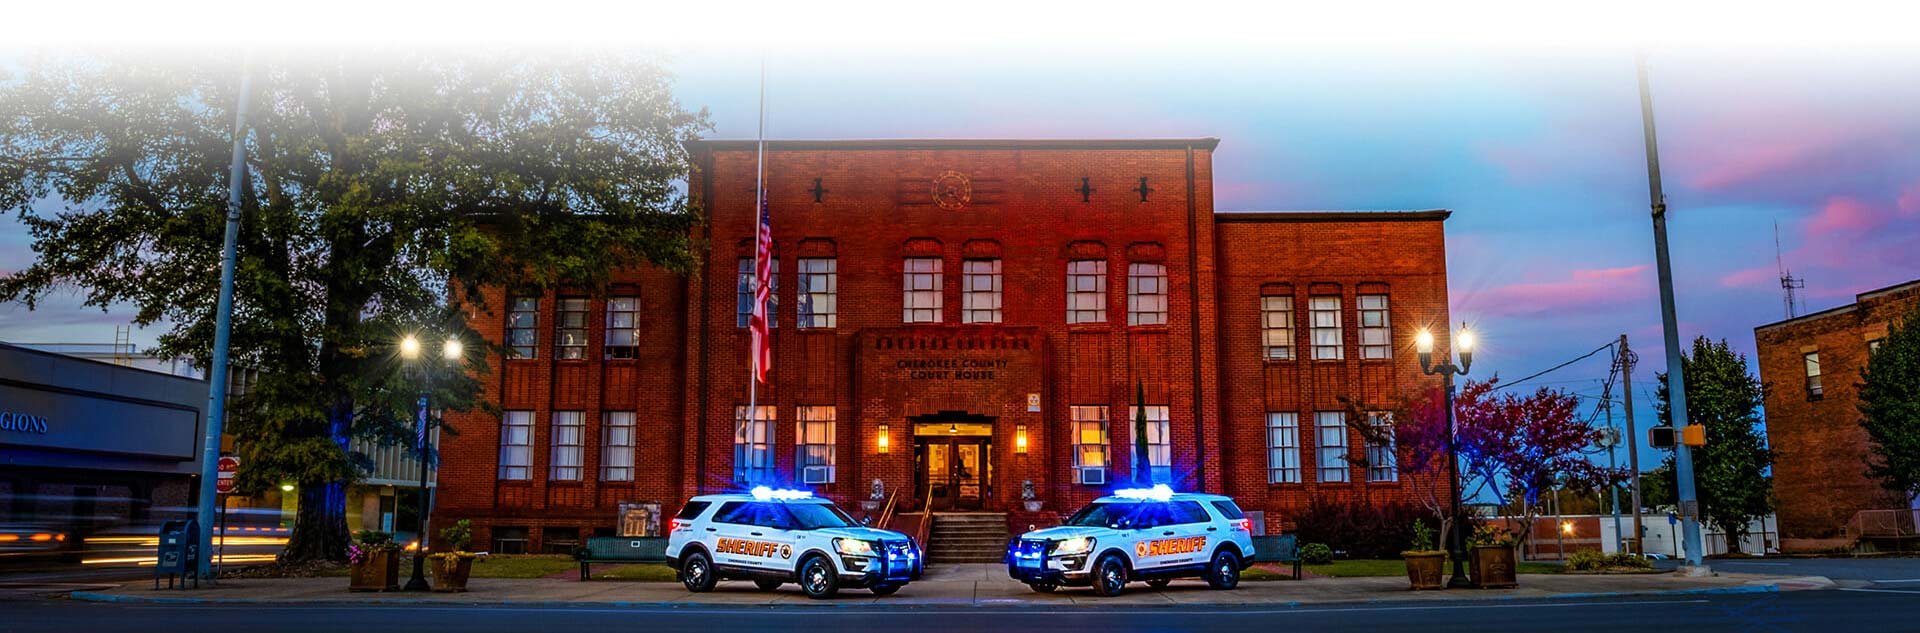 Image of Cherokee County Sheriff's Department